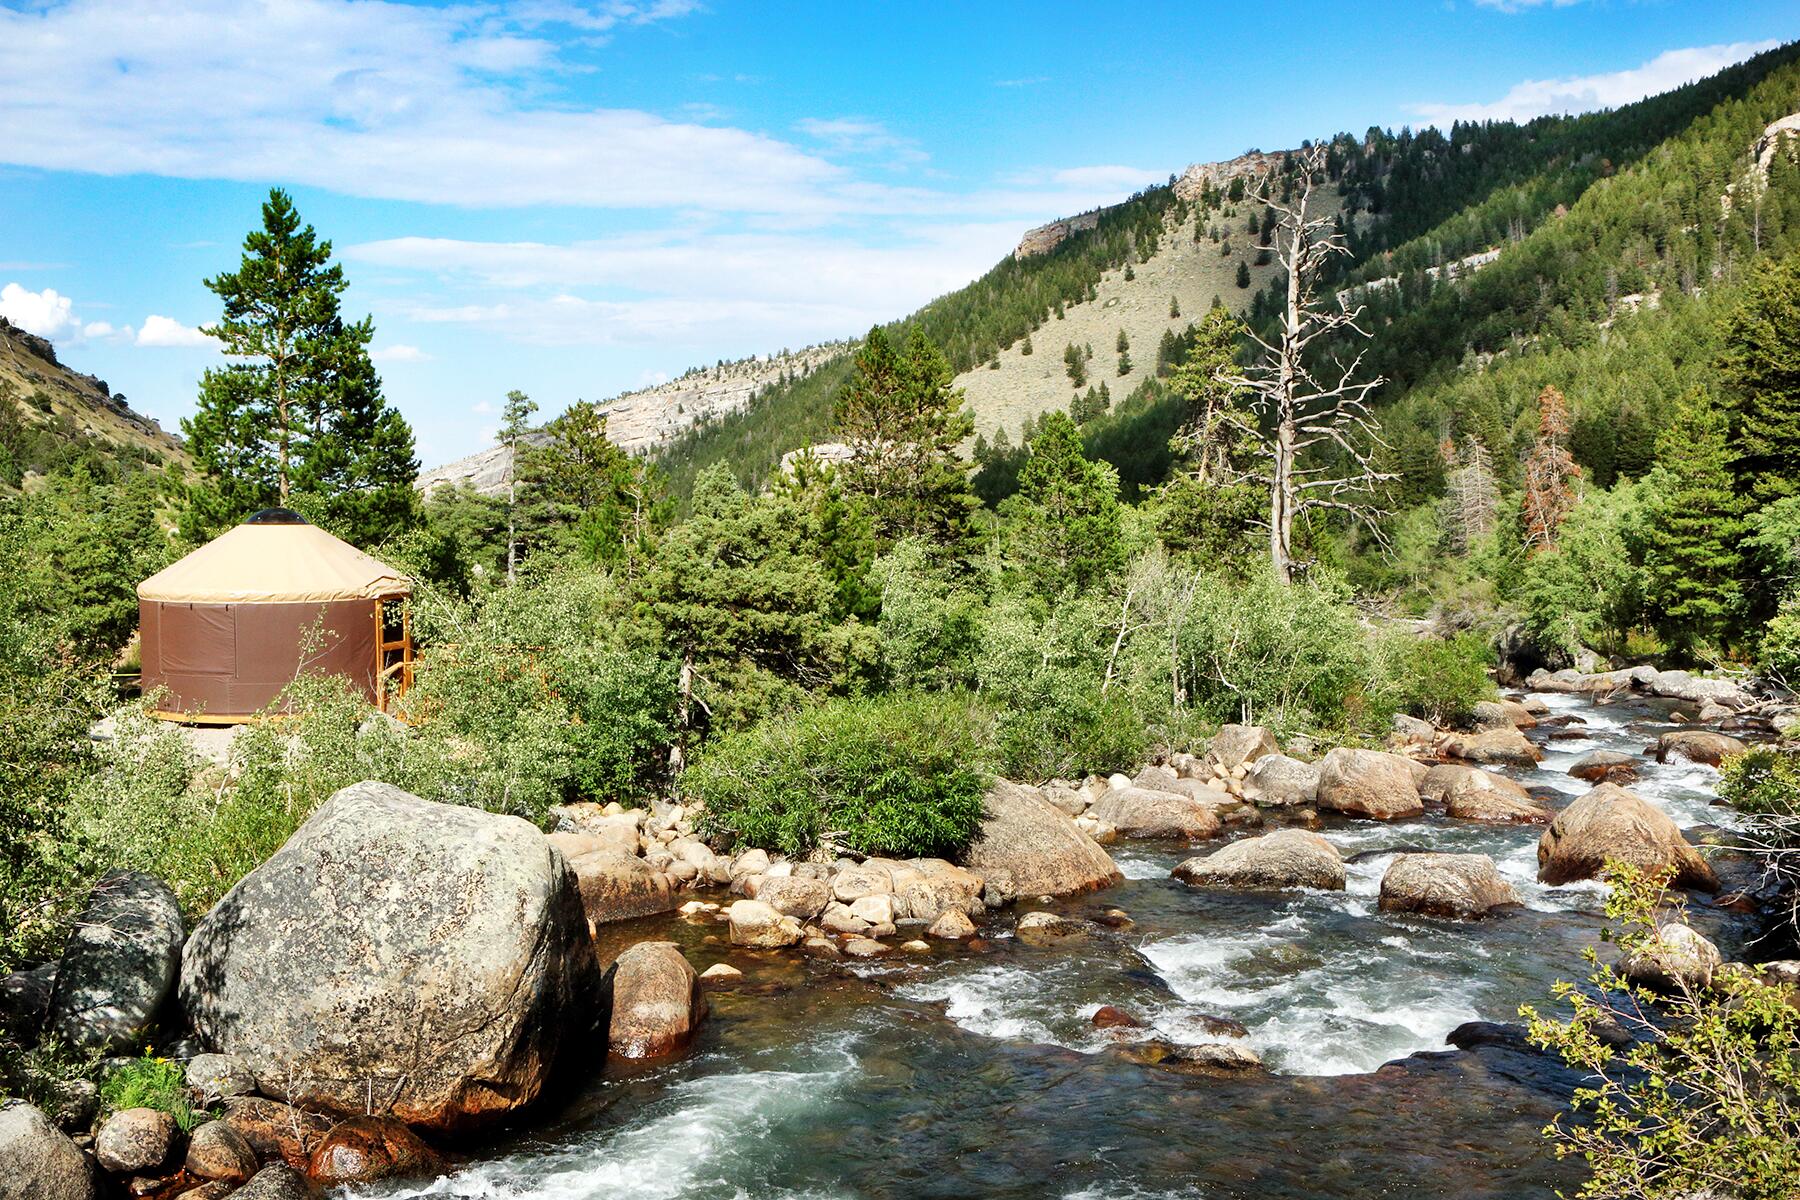 <a href='https://www.fodors.com/world/north-america/usa/wyoming/experiences/news/photos/whats-better-yellowstone-national-park-or-wind-river-region#'>From &quot;What's Better: Yellowstone National Park or Wind River?: Yellowstone vs. Wind River:  Accommodations&quot;</a>